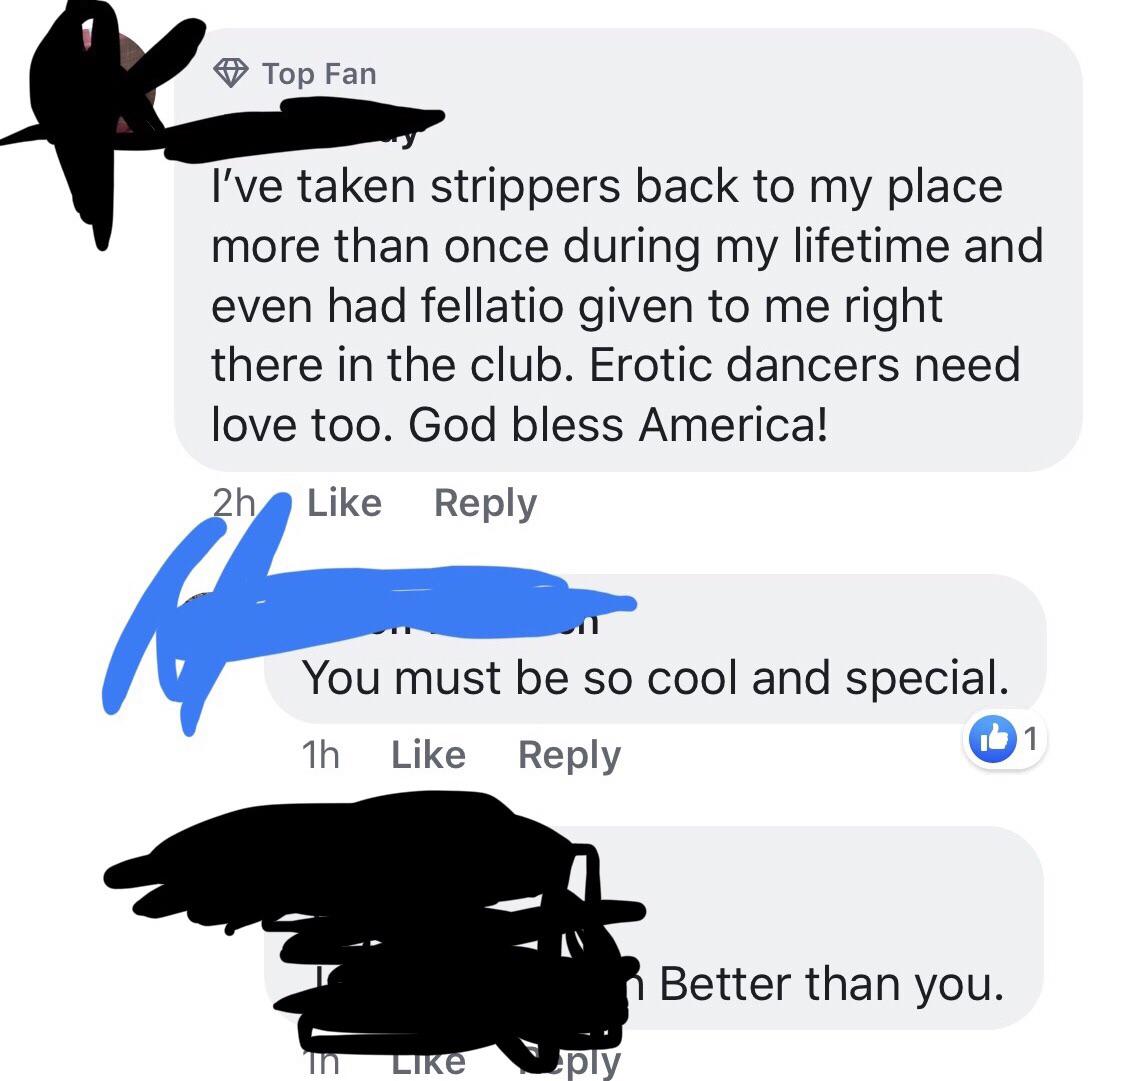 sex memes- cartoon - Top Fan I've taken strippers back to my place more than once during my lifetime and even had fellatio given to me right there in the club. Erotic dancers need love too. God bless America! 2h You must be so cool and special. 1h n Bette